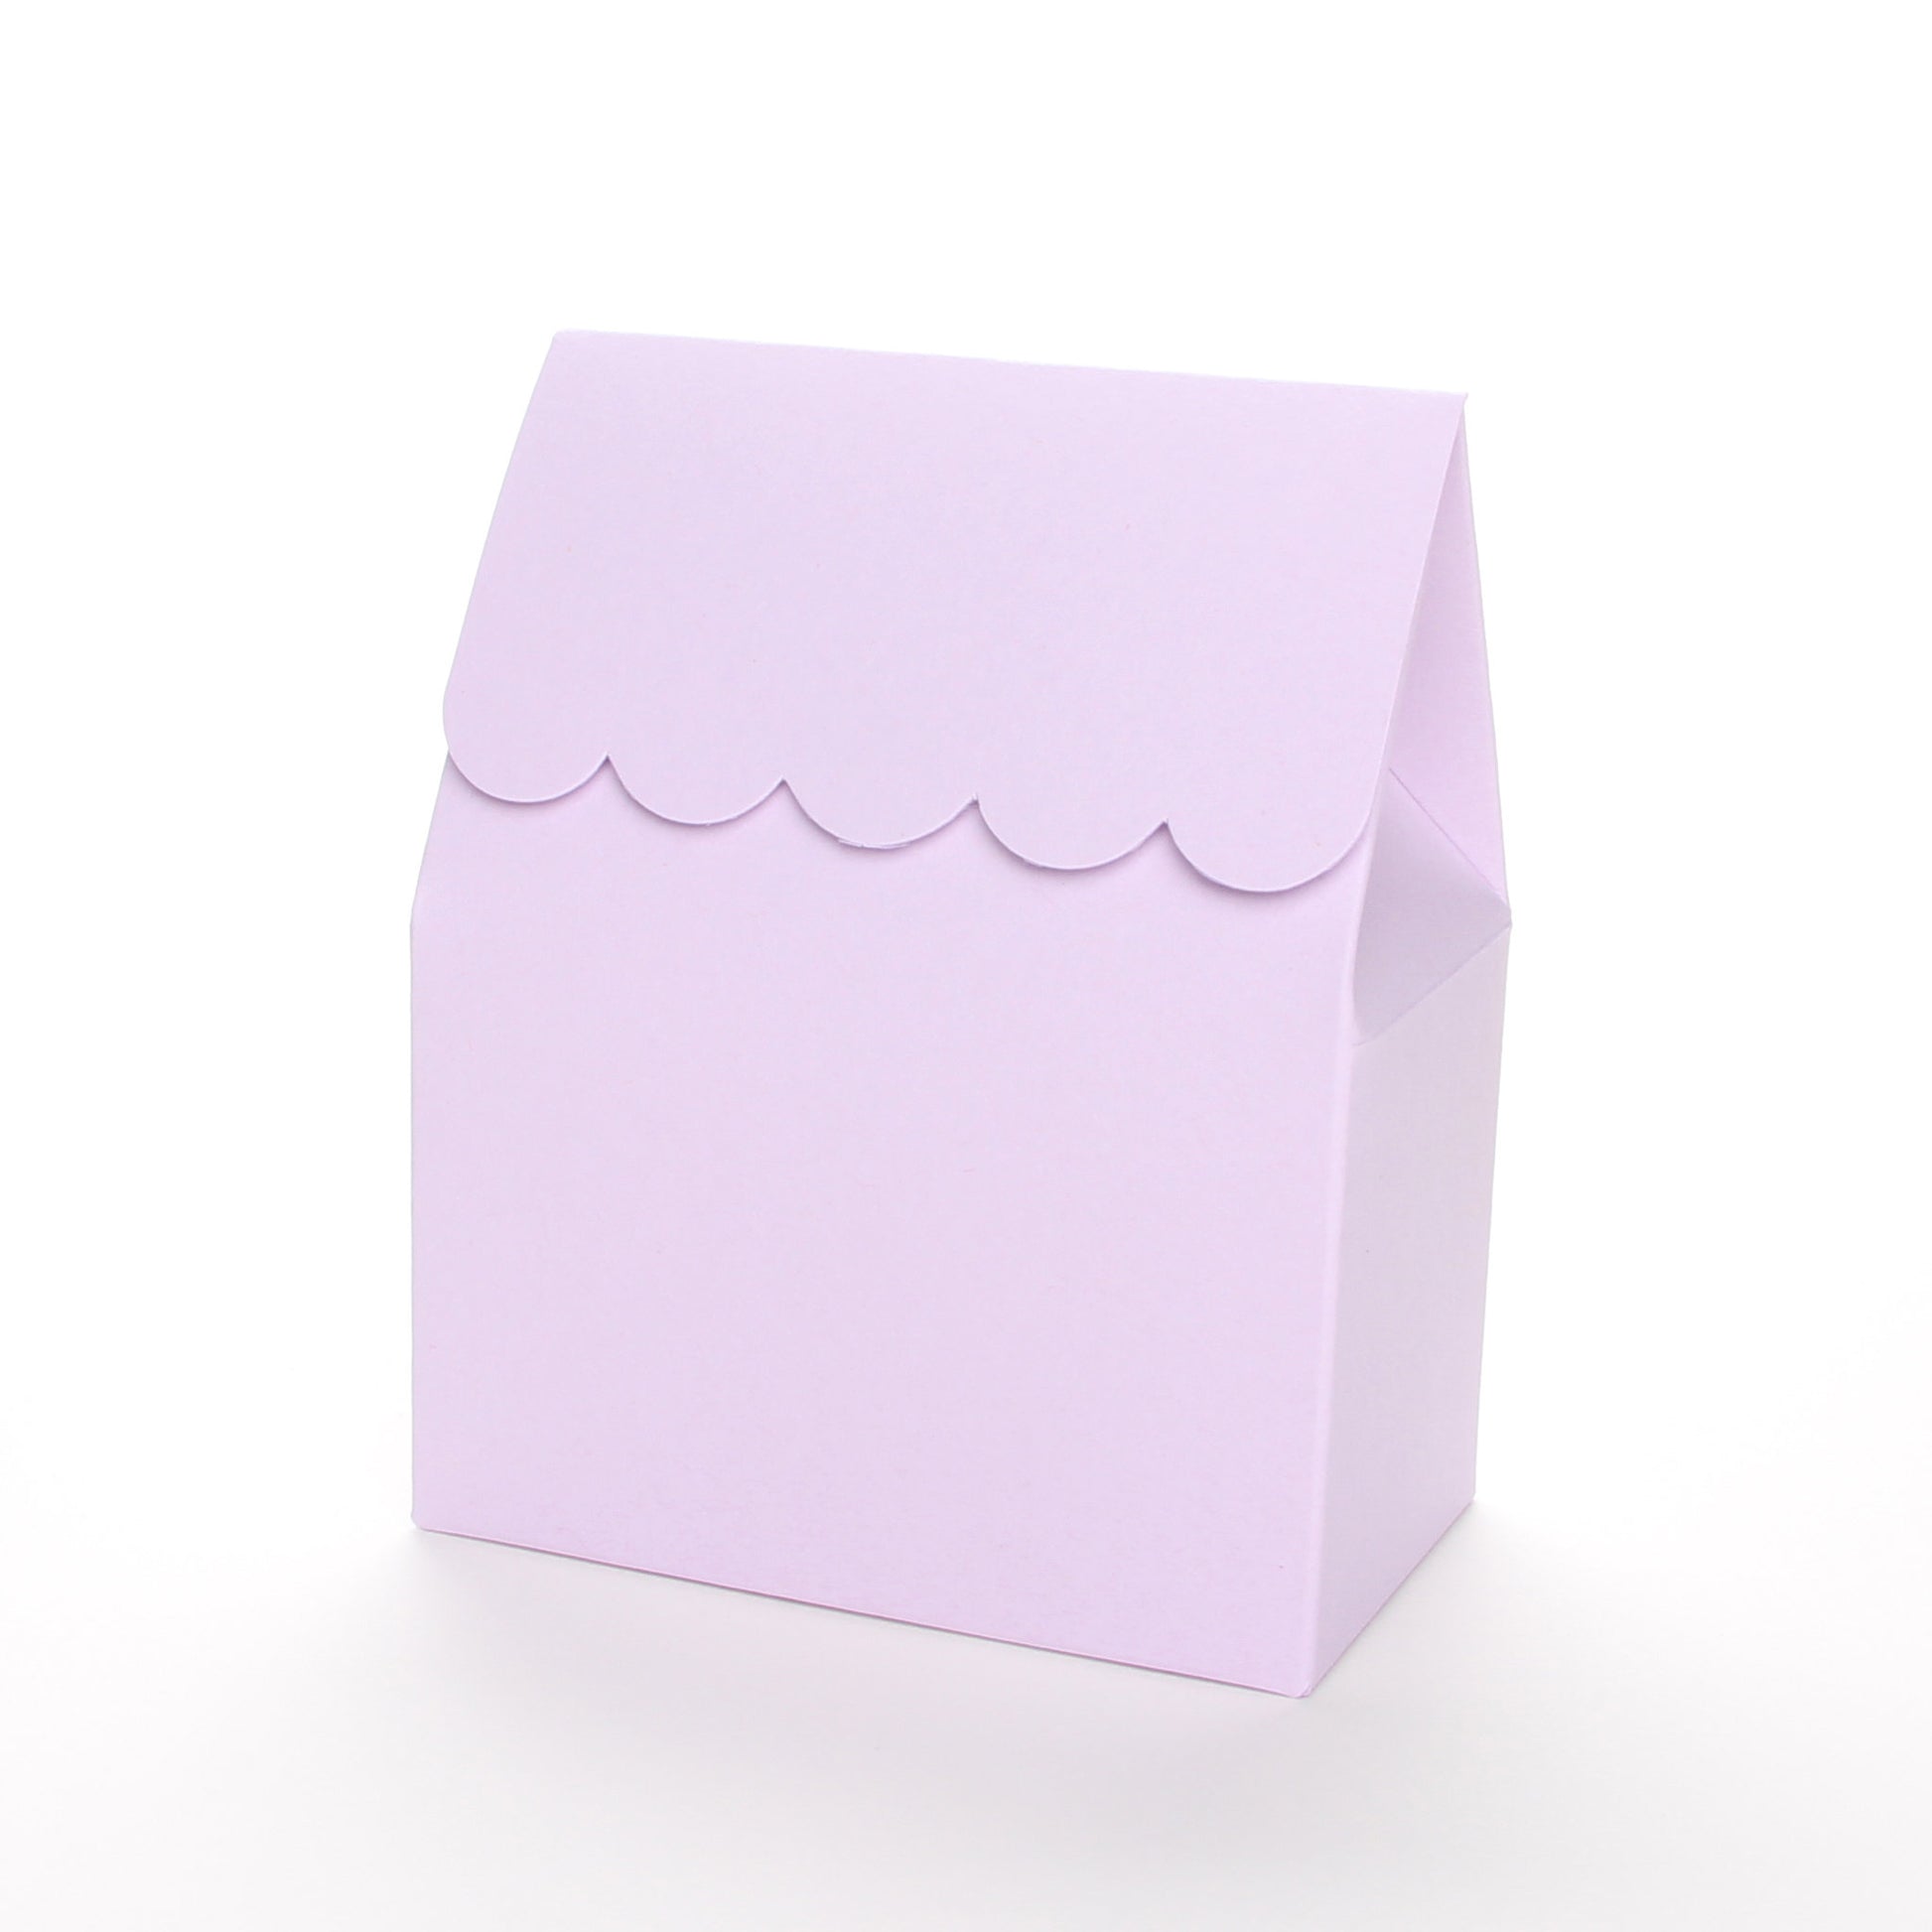 Lavender favor box by Lux Party with a scalloped edge on a white background.